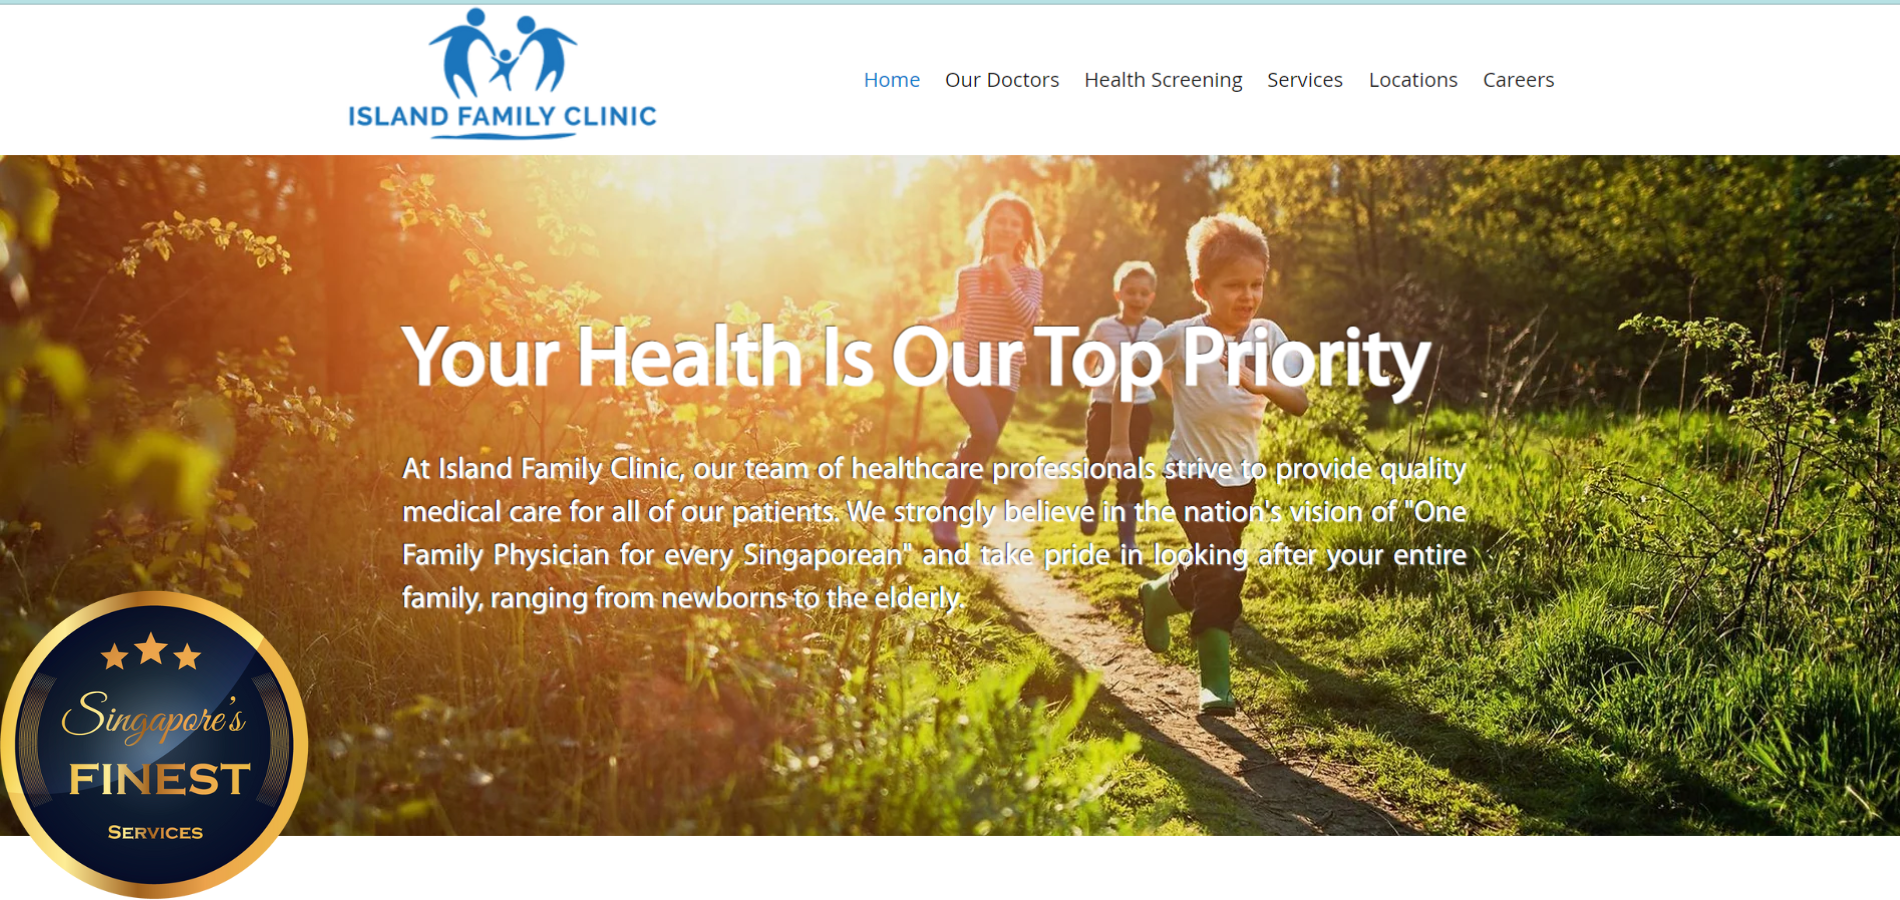 The Finest Family Medicine Clinics in Singapore